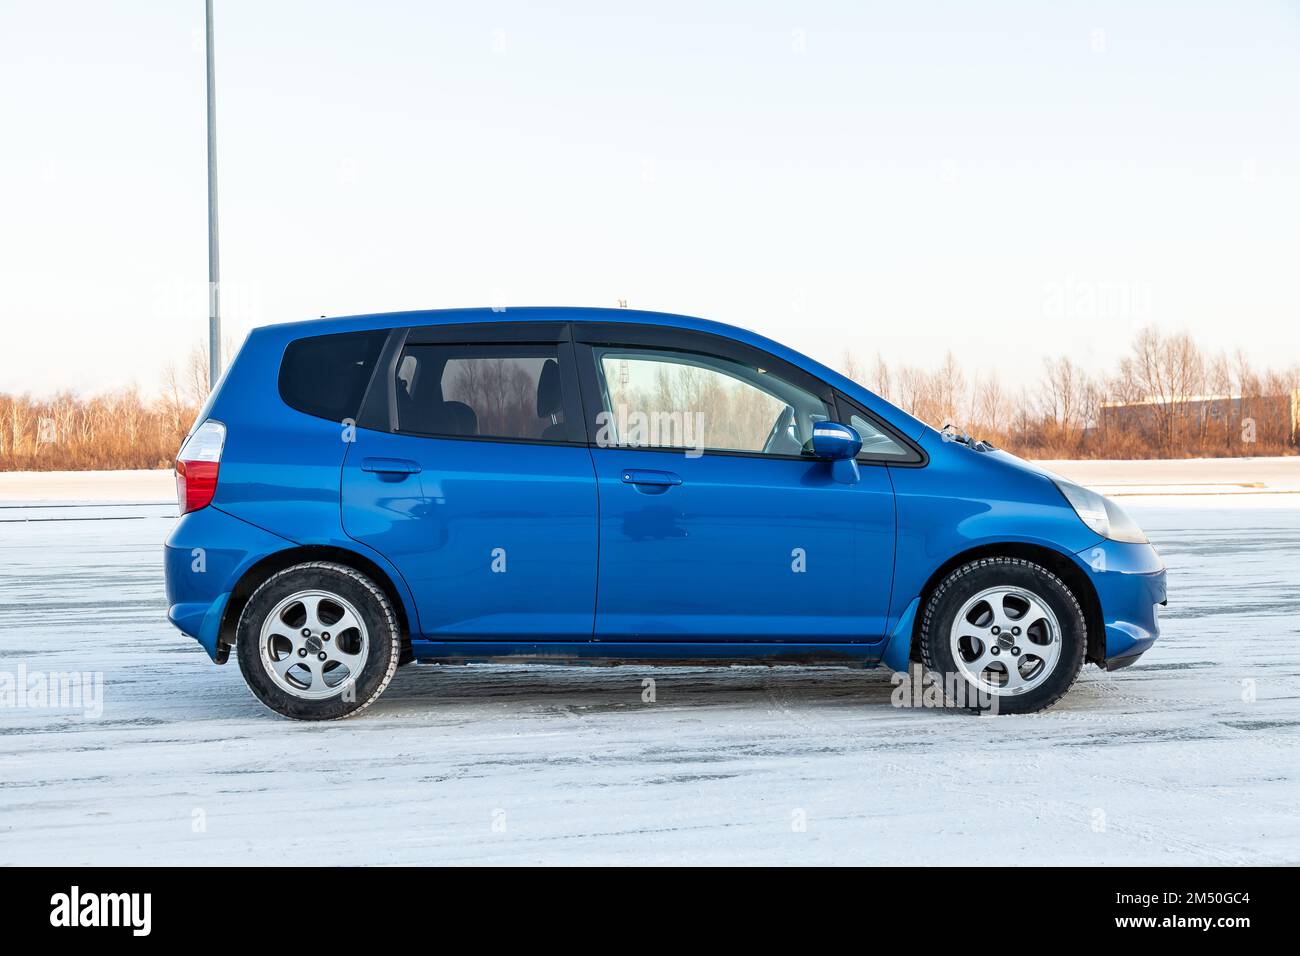 Novosibirsk, Russia - 12.09.2022: Blue Honda Fit car exterior view on the winter backgound on parking. Stock Photo